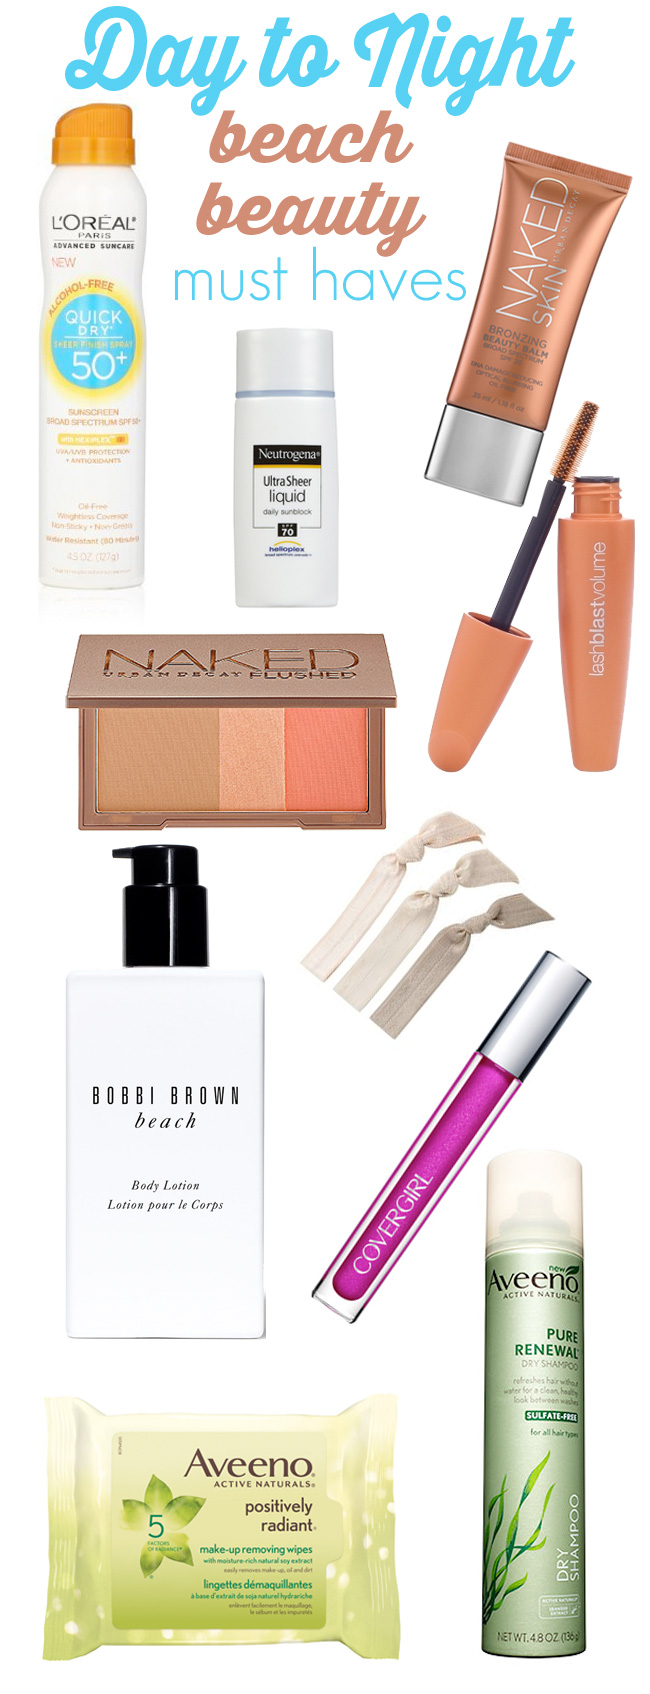 Day to Night Beach Beauty : The beauty products you need to go from morning til night at the beach via beautifulmakeupsearch.com